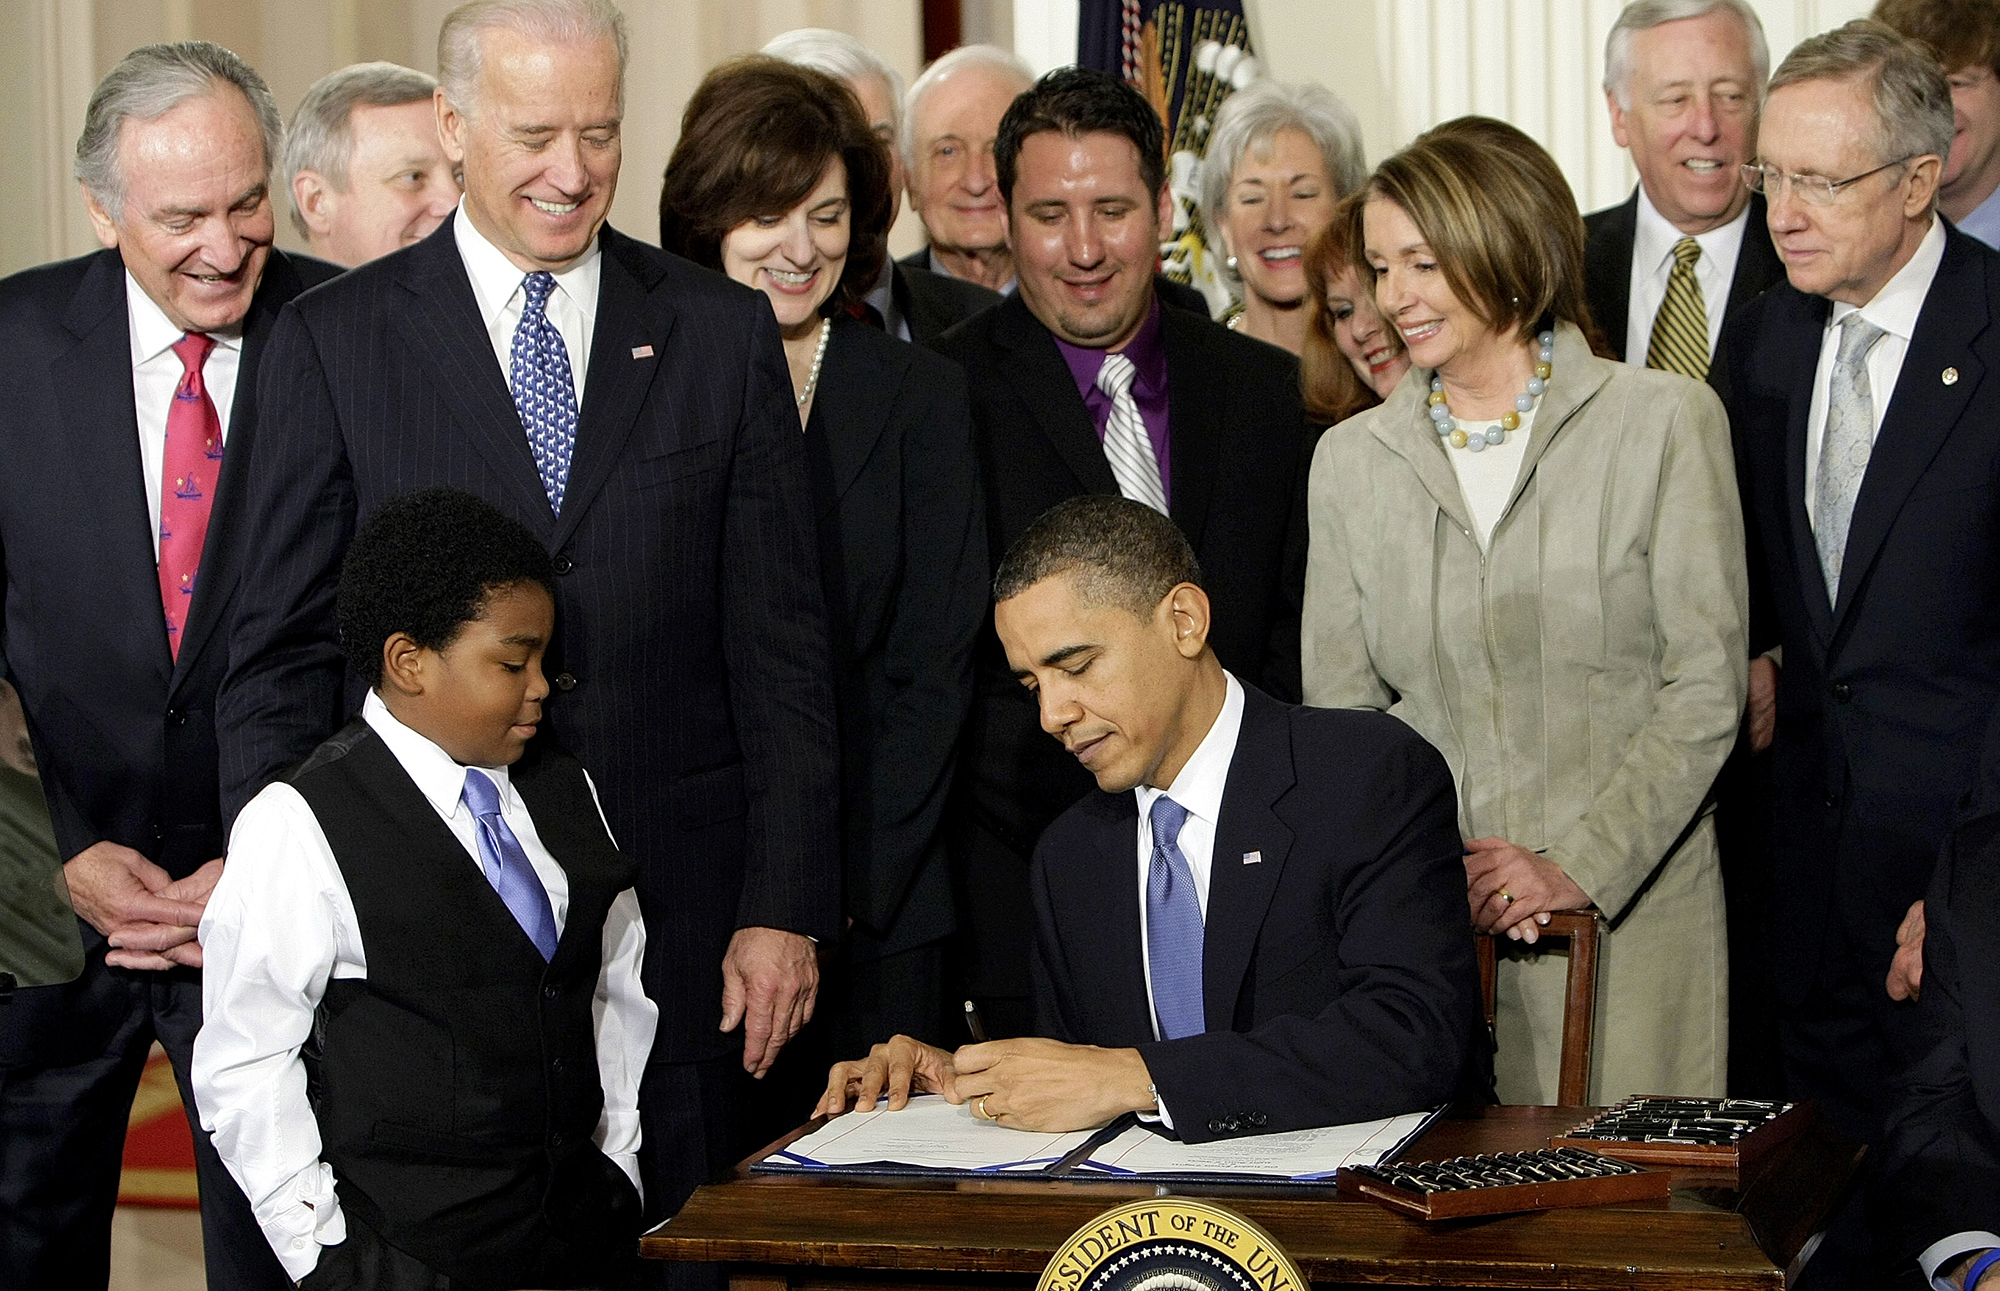 President Barack Obama signs the Affordable Care Act surrounded by lawmakers and a young child standing by the table.